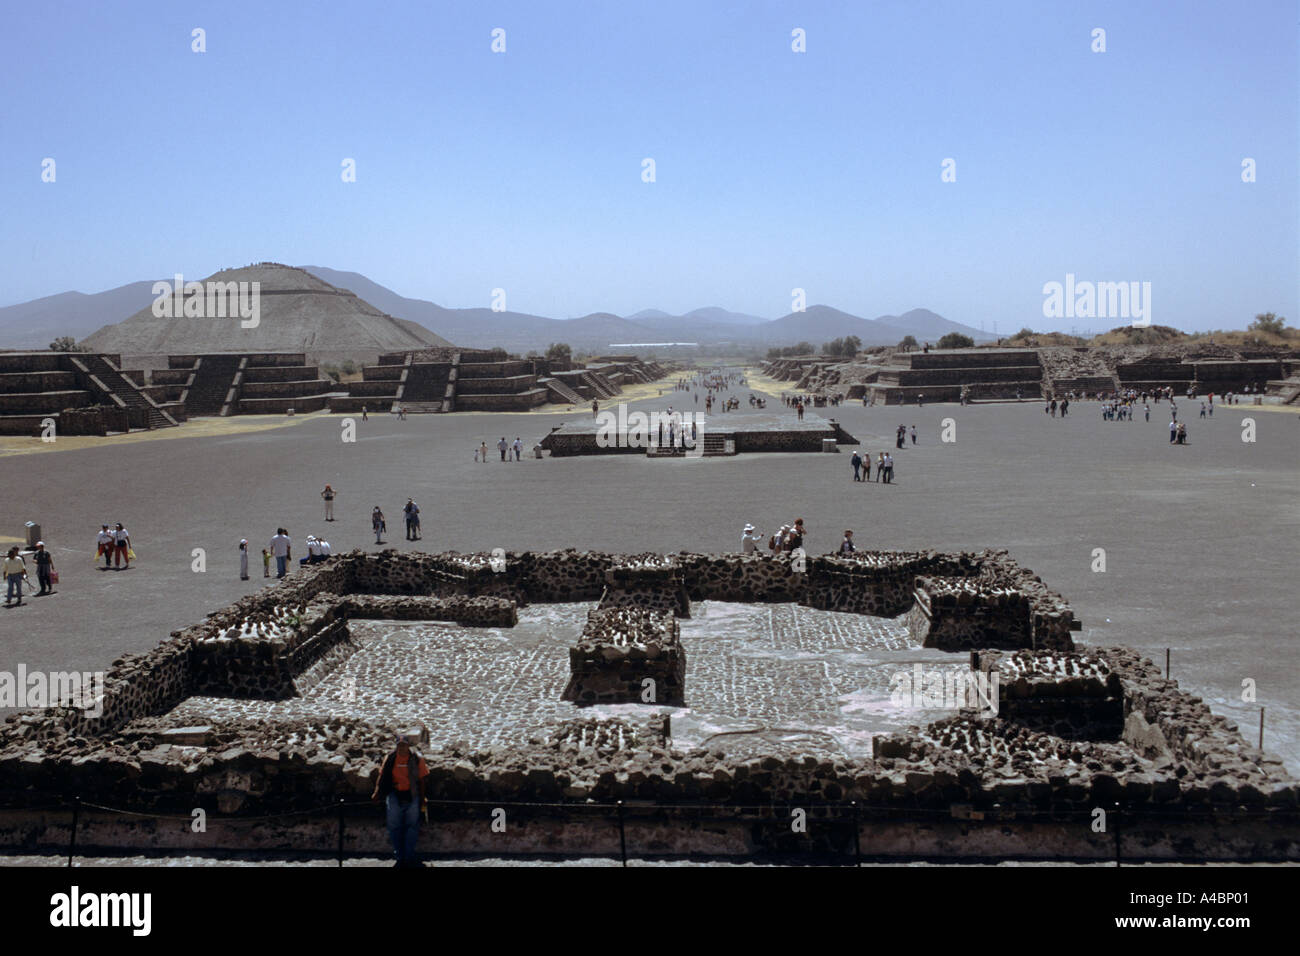 Teotihuacan, Mexico. The Plaza of the Moon and the Avenue of the Dead; huge pre-Columbian city. Stock Photo